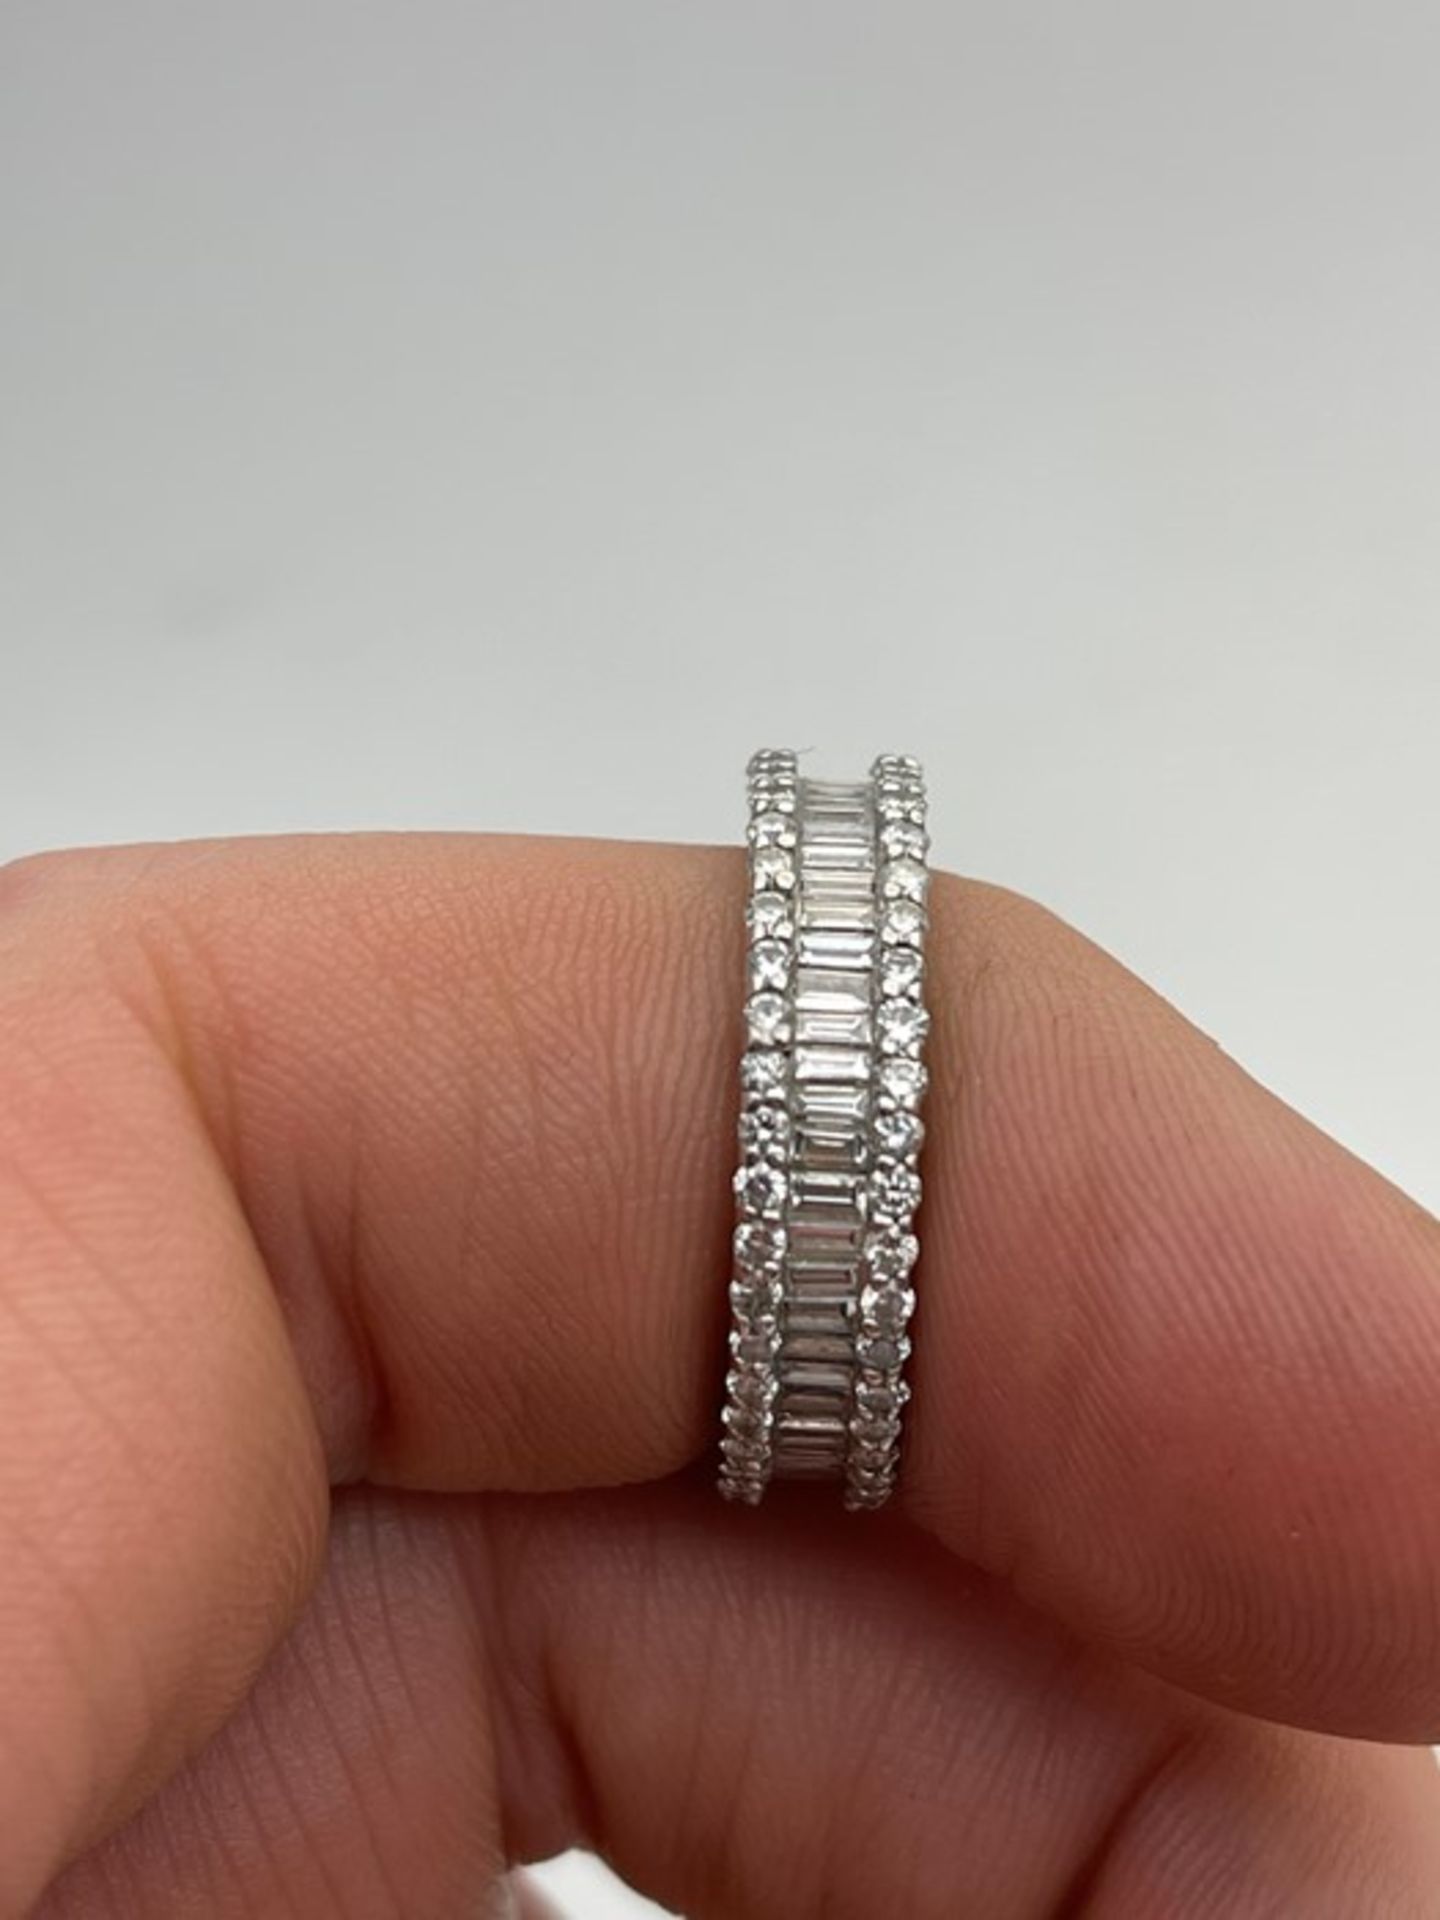 ***£7900.00*** 18CT WHITE GOLD DIAMOND FULL ETERNITY RING, SET WITH FIFTY SEVEN BAGUETTE CUT - Image 3 of 5